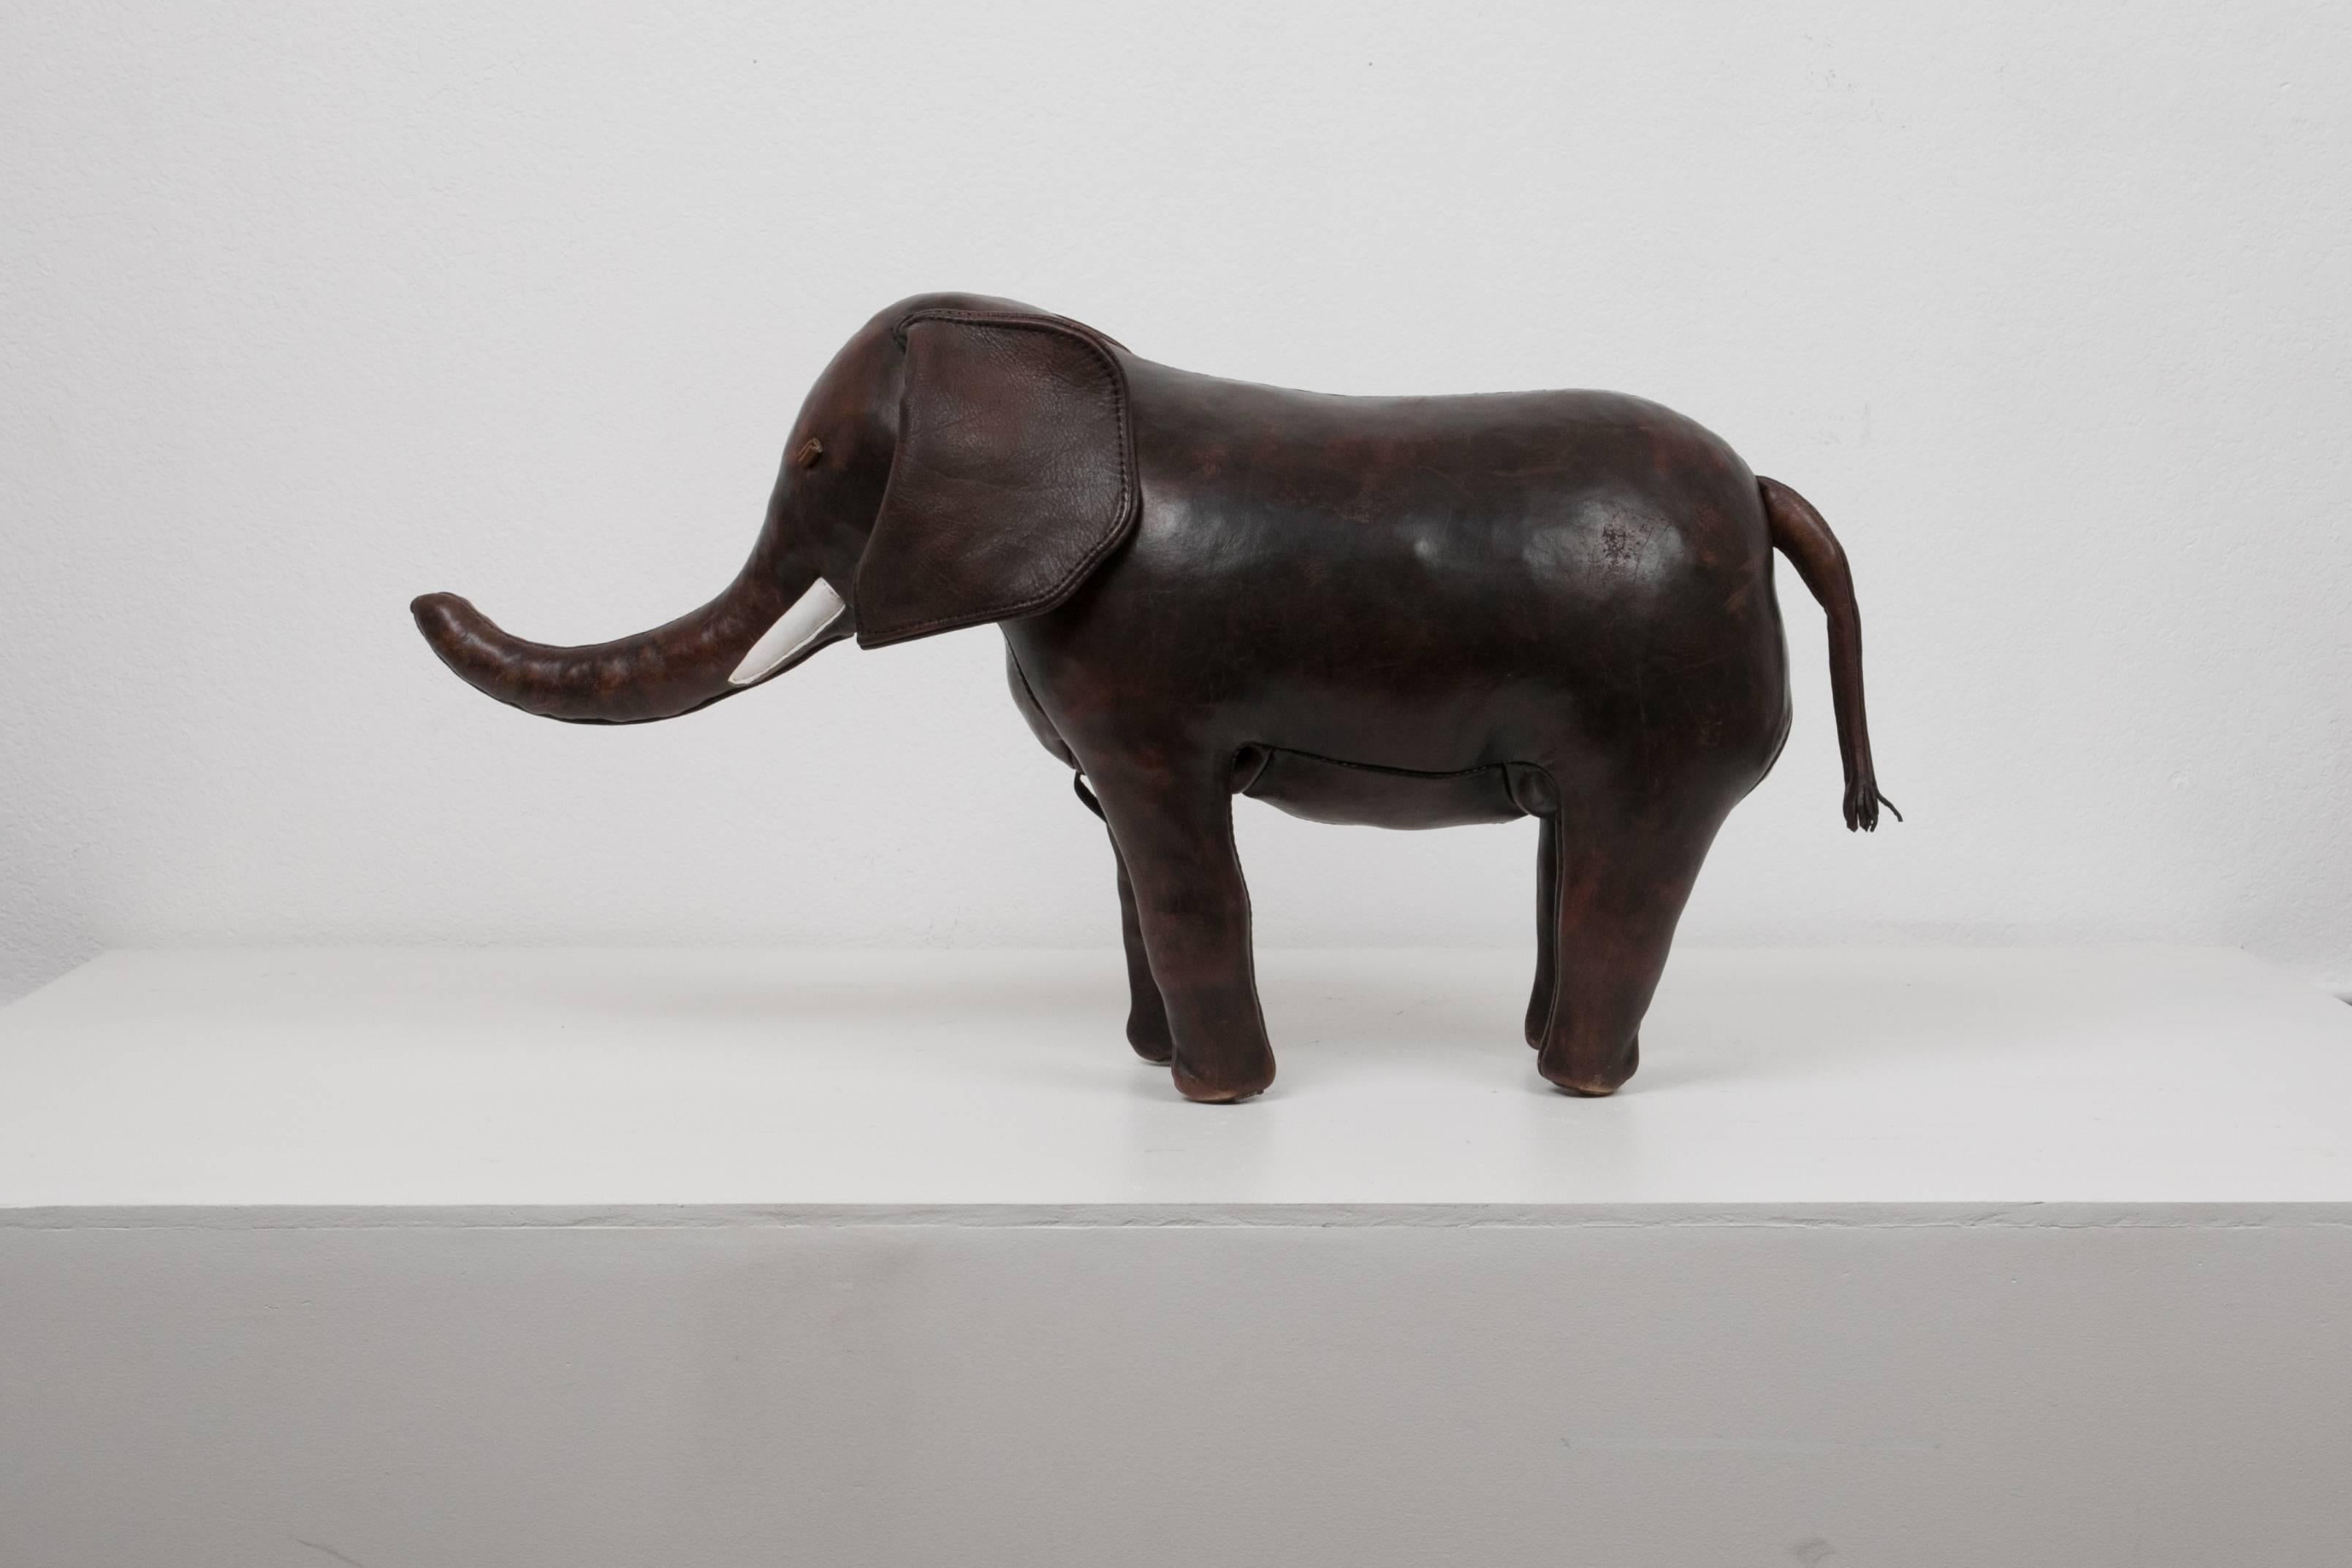 Developed initially for Liberty of London this leather elephant later became part of a collection of animals designed by Dimitri Omersa and sold in the US by Abercrombie and Fitch. This example is the 